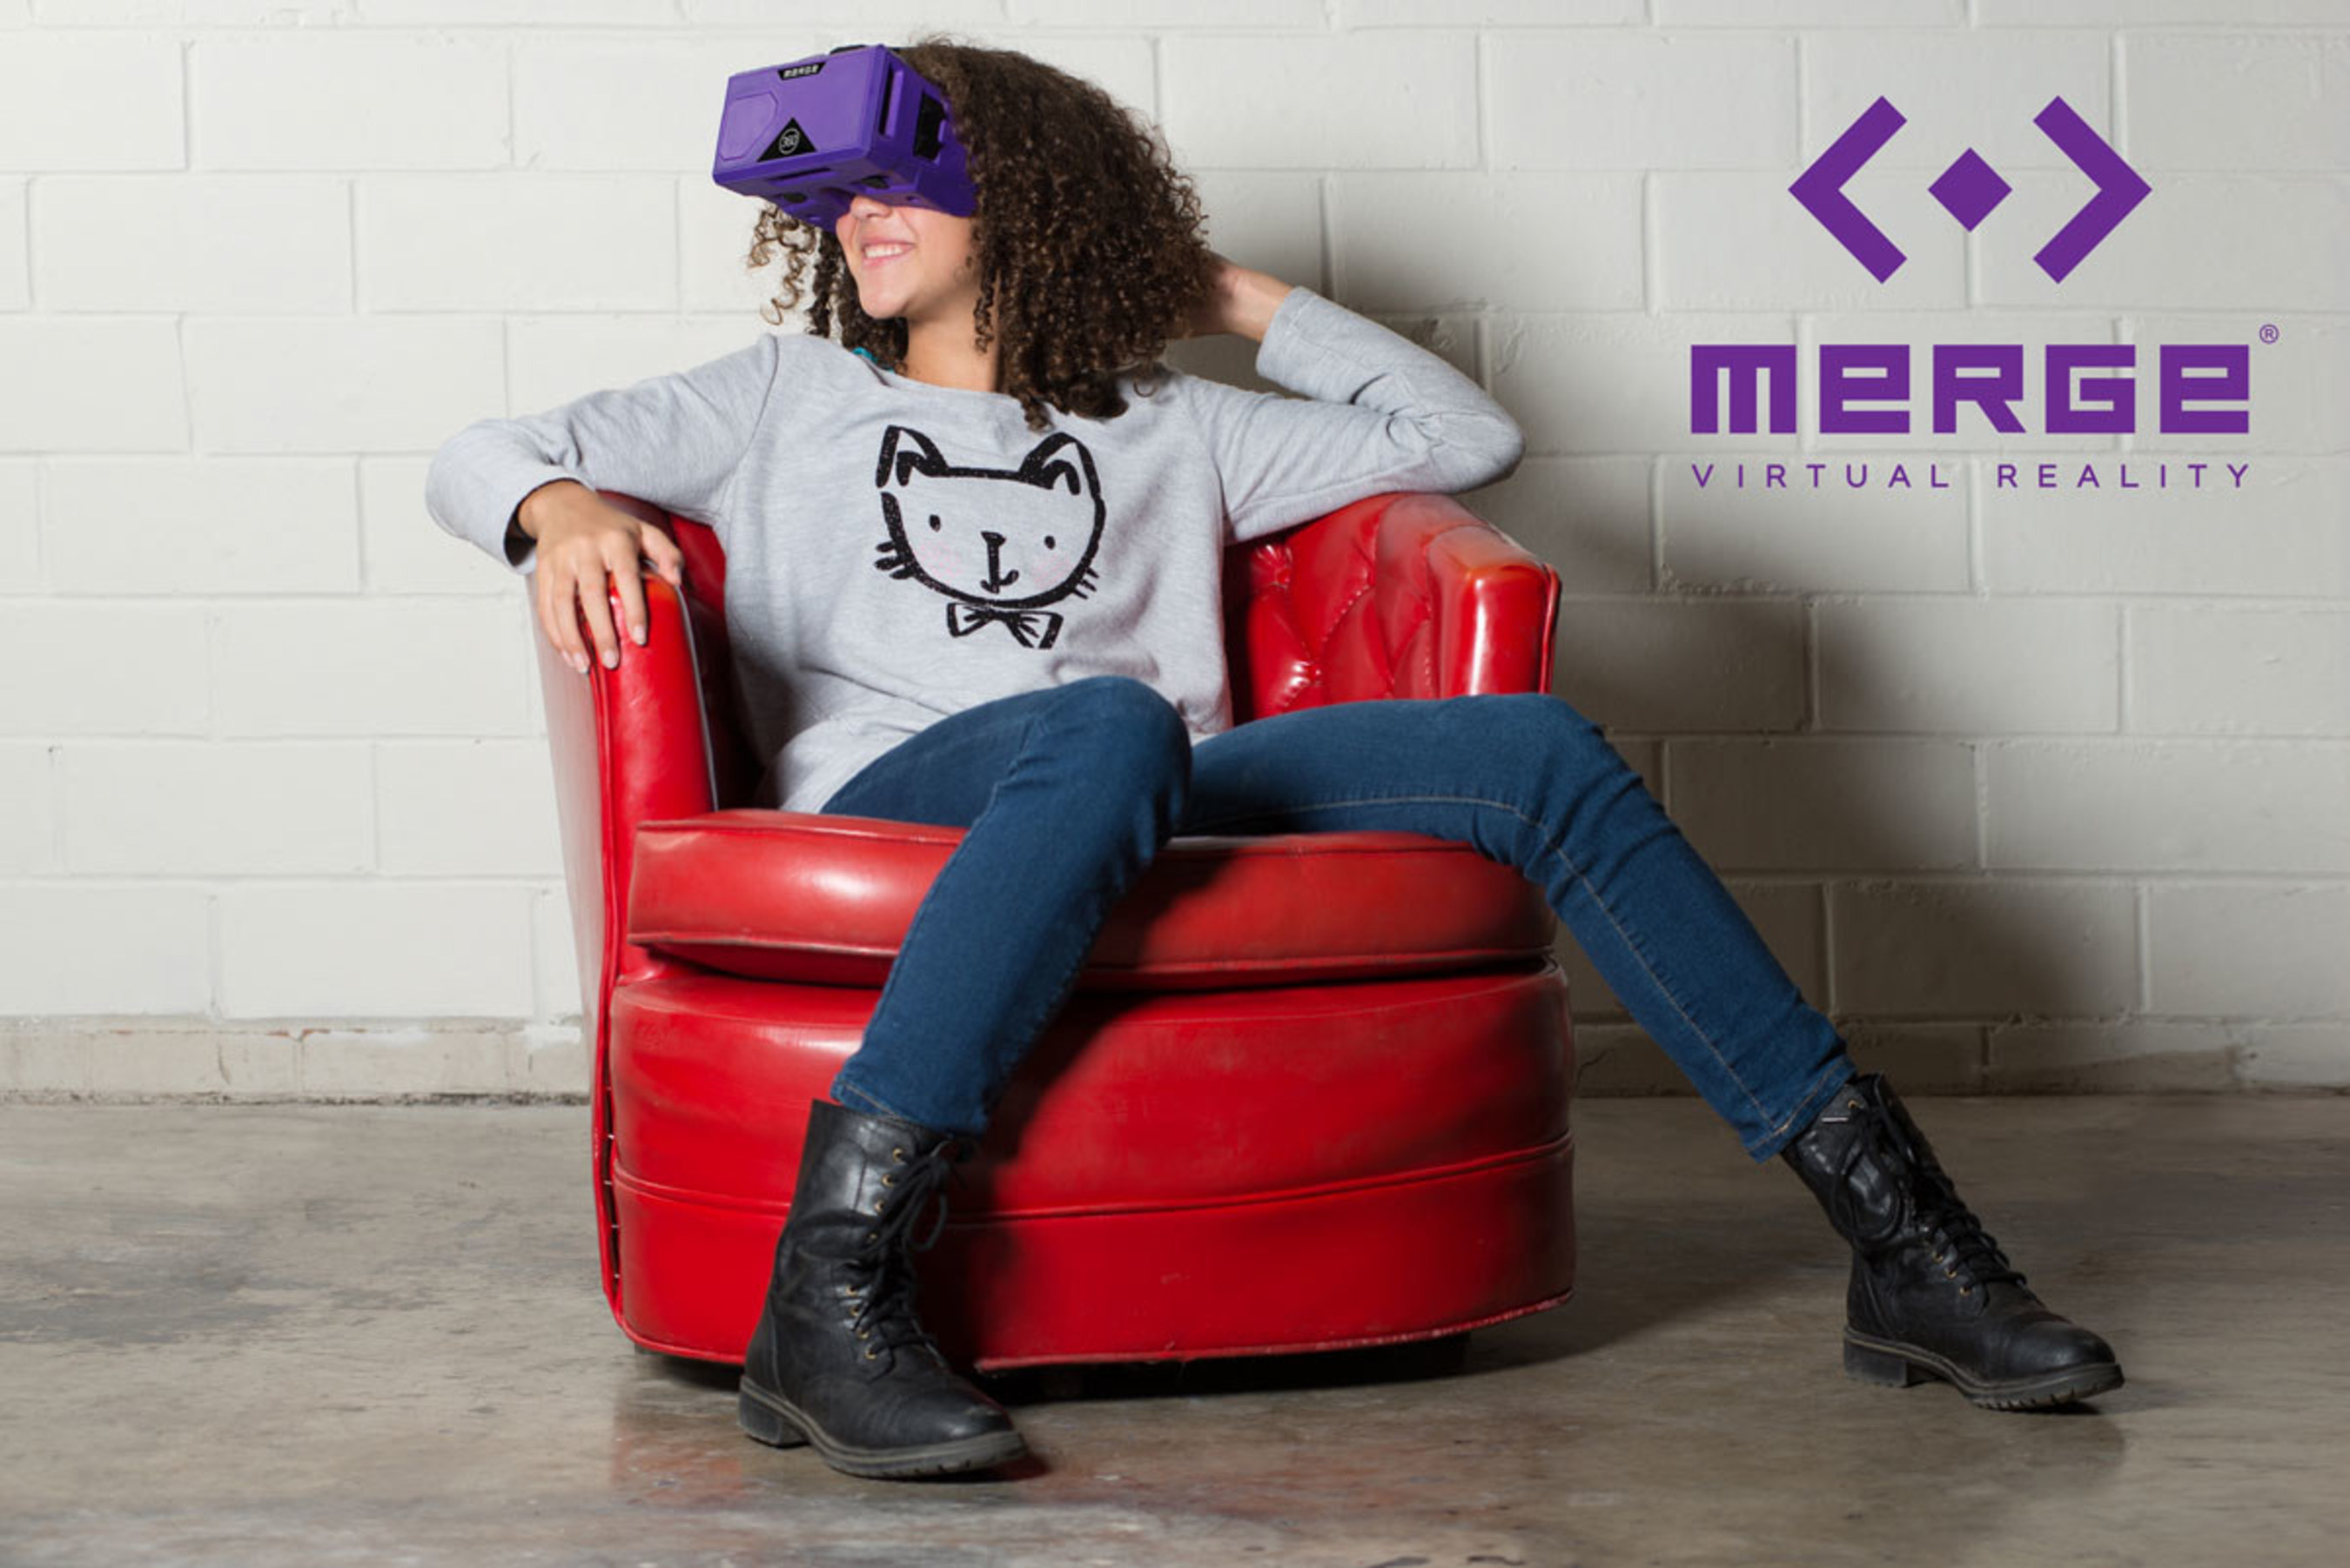 Merge VR Goggles offer virtual reality powered by your smartphone, and are compatible with nearly any iOS or Android device from the last two years.